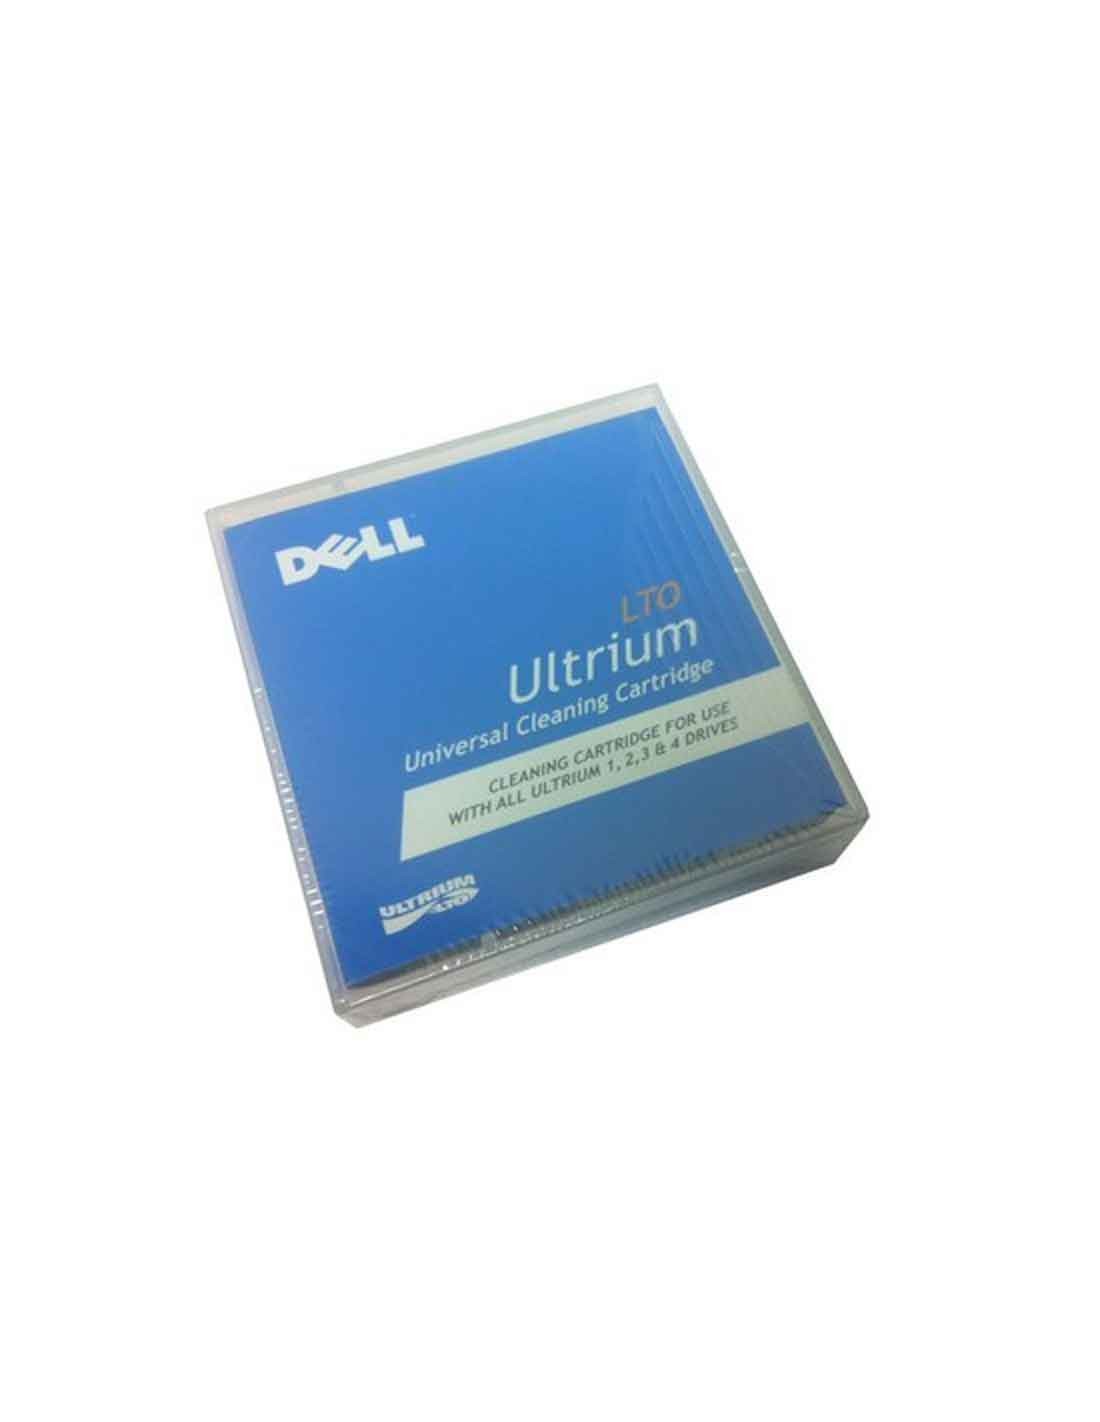 LTO Tape Cleaning Cartridge - Includes Barcode at a cheap price and fast free delivery in Dubai